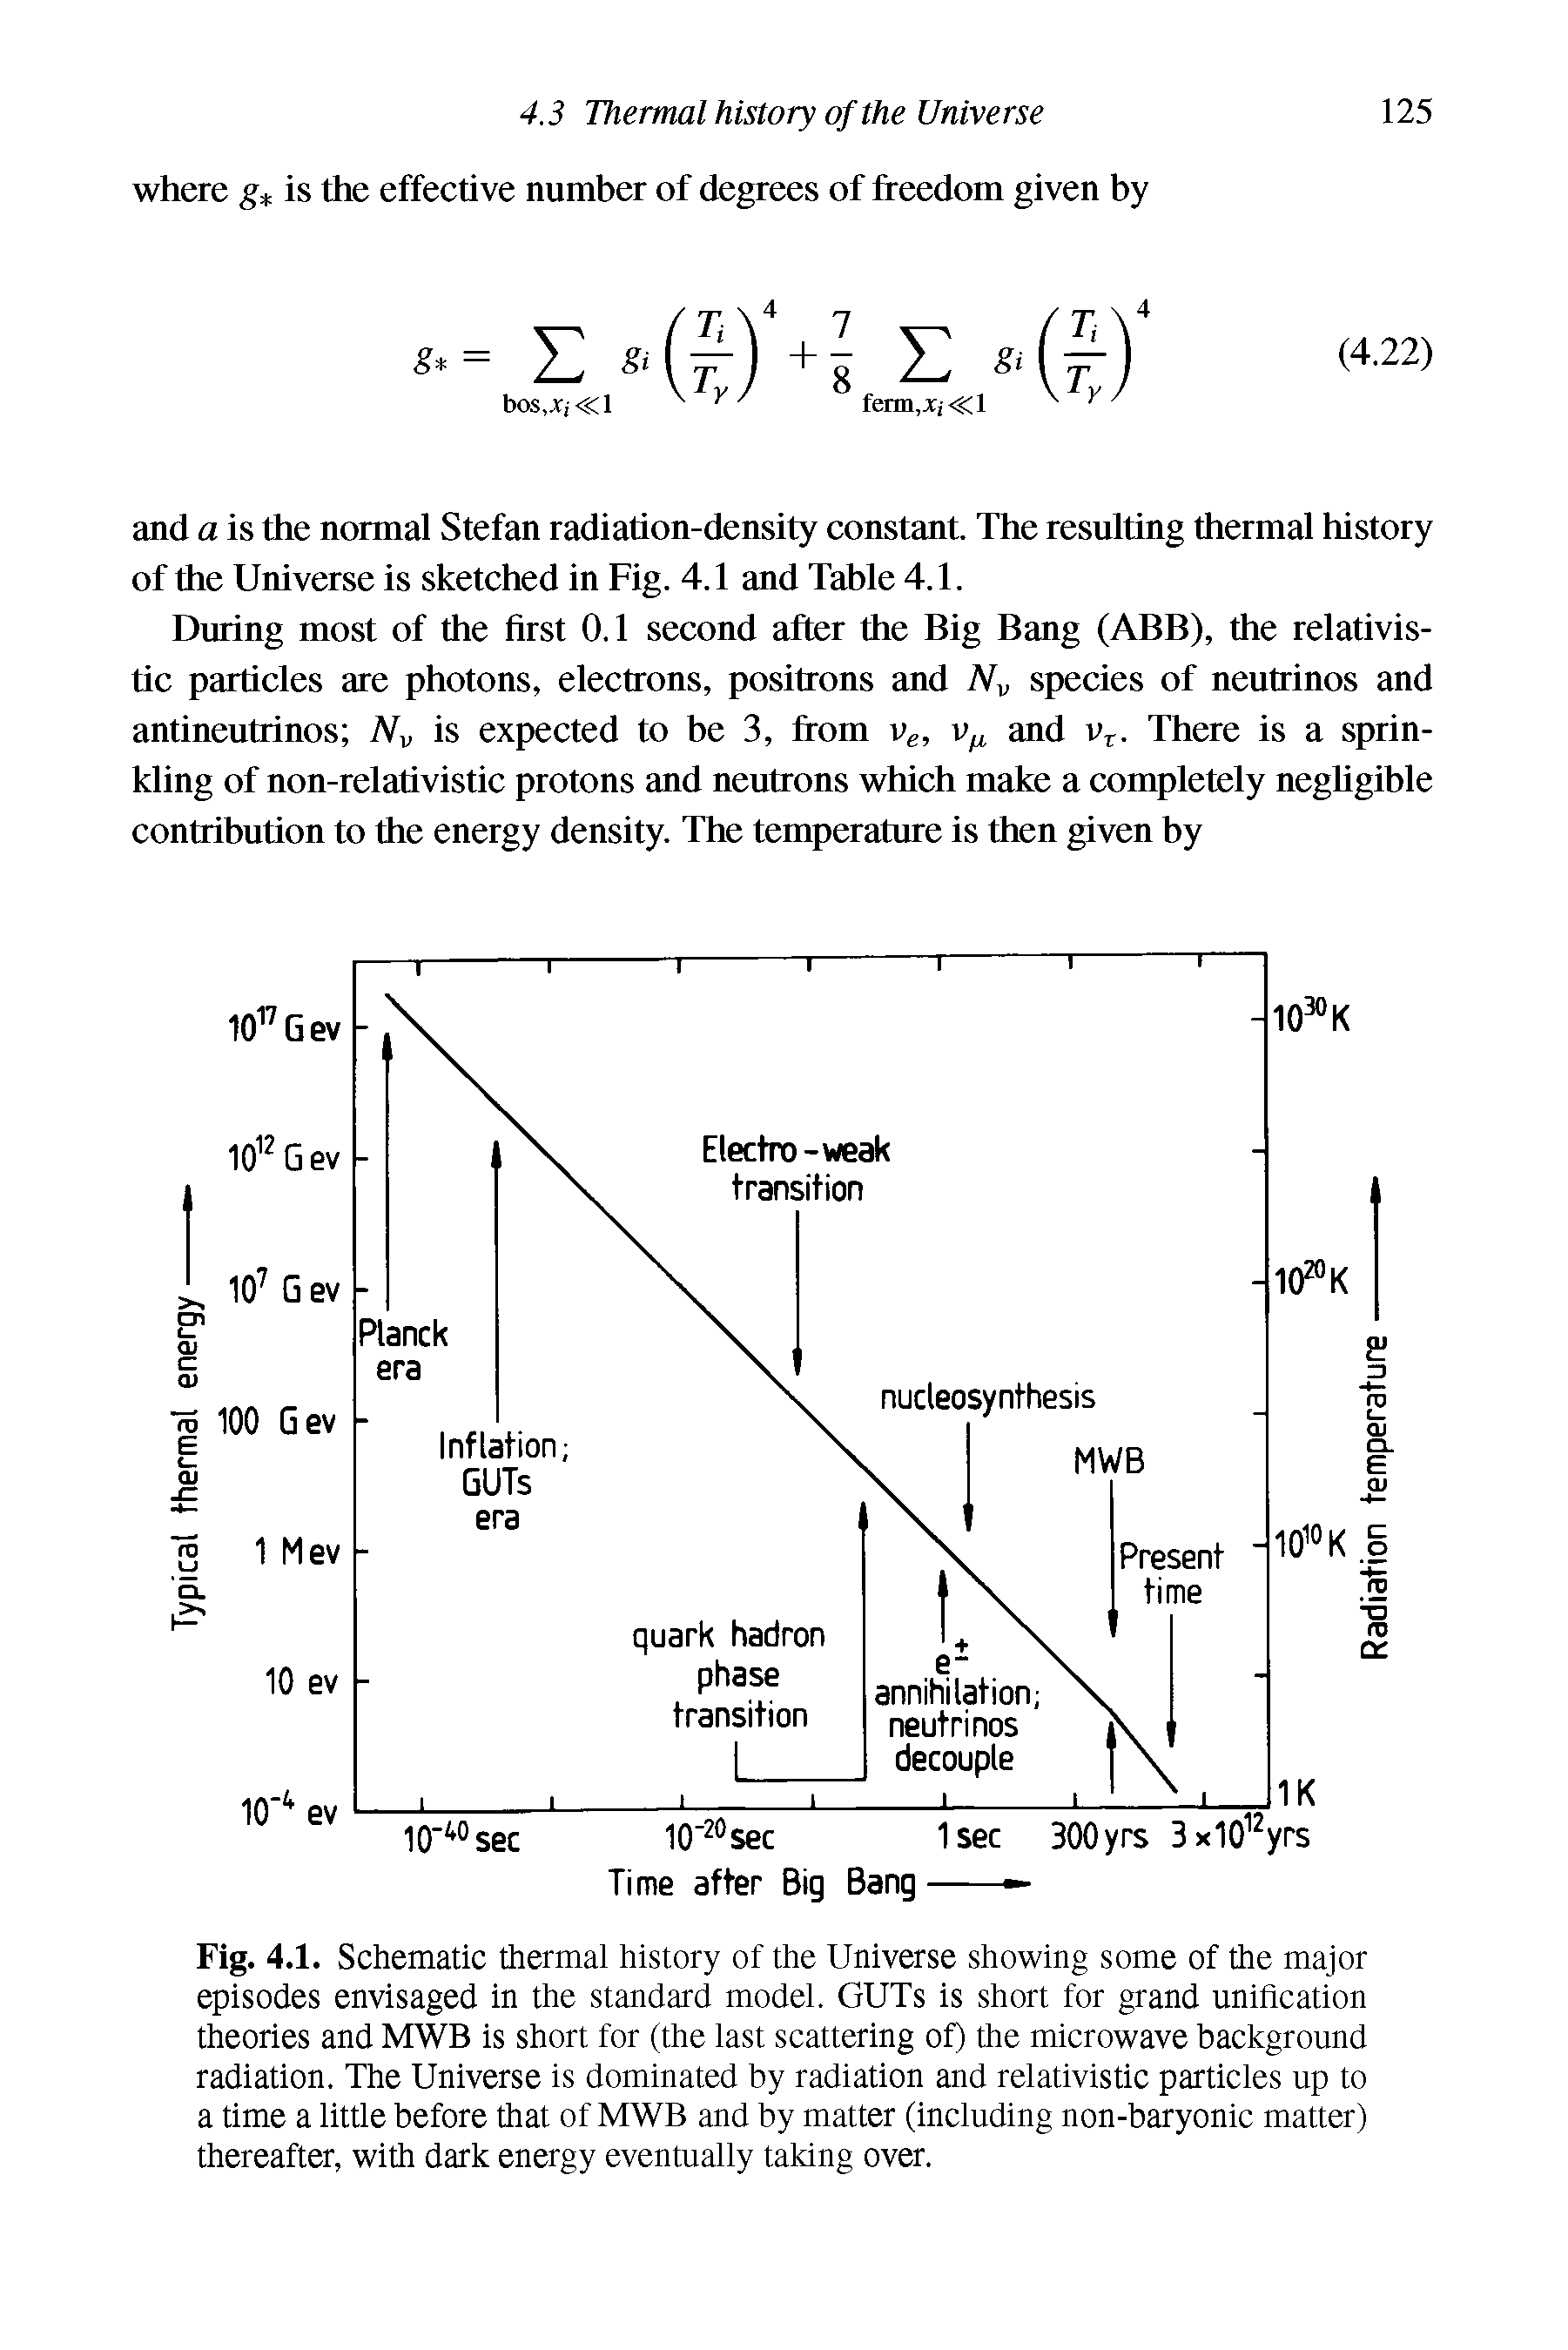 Fig. 4.1. Schematic thermal history of the Universe showing some of the major episodes envisaged in the standard model. GUTs is short for grand unification theories and MWB is short for (the last scattering of) the microwave background radiation. The Universe is dominated by radiation and relativistic particles up to a time a little before that of MWB and by matter (including non-baryonic matter) thereafter, with dark energy eventually taking over.